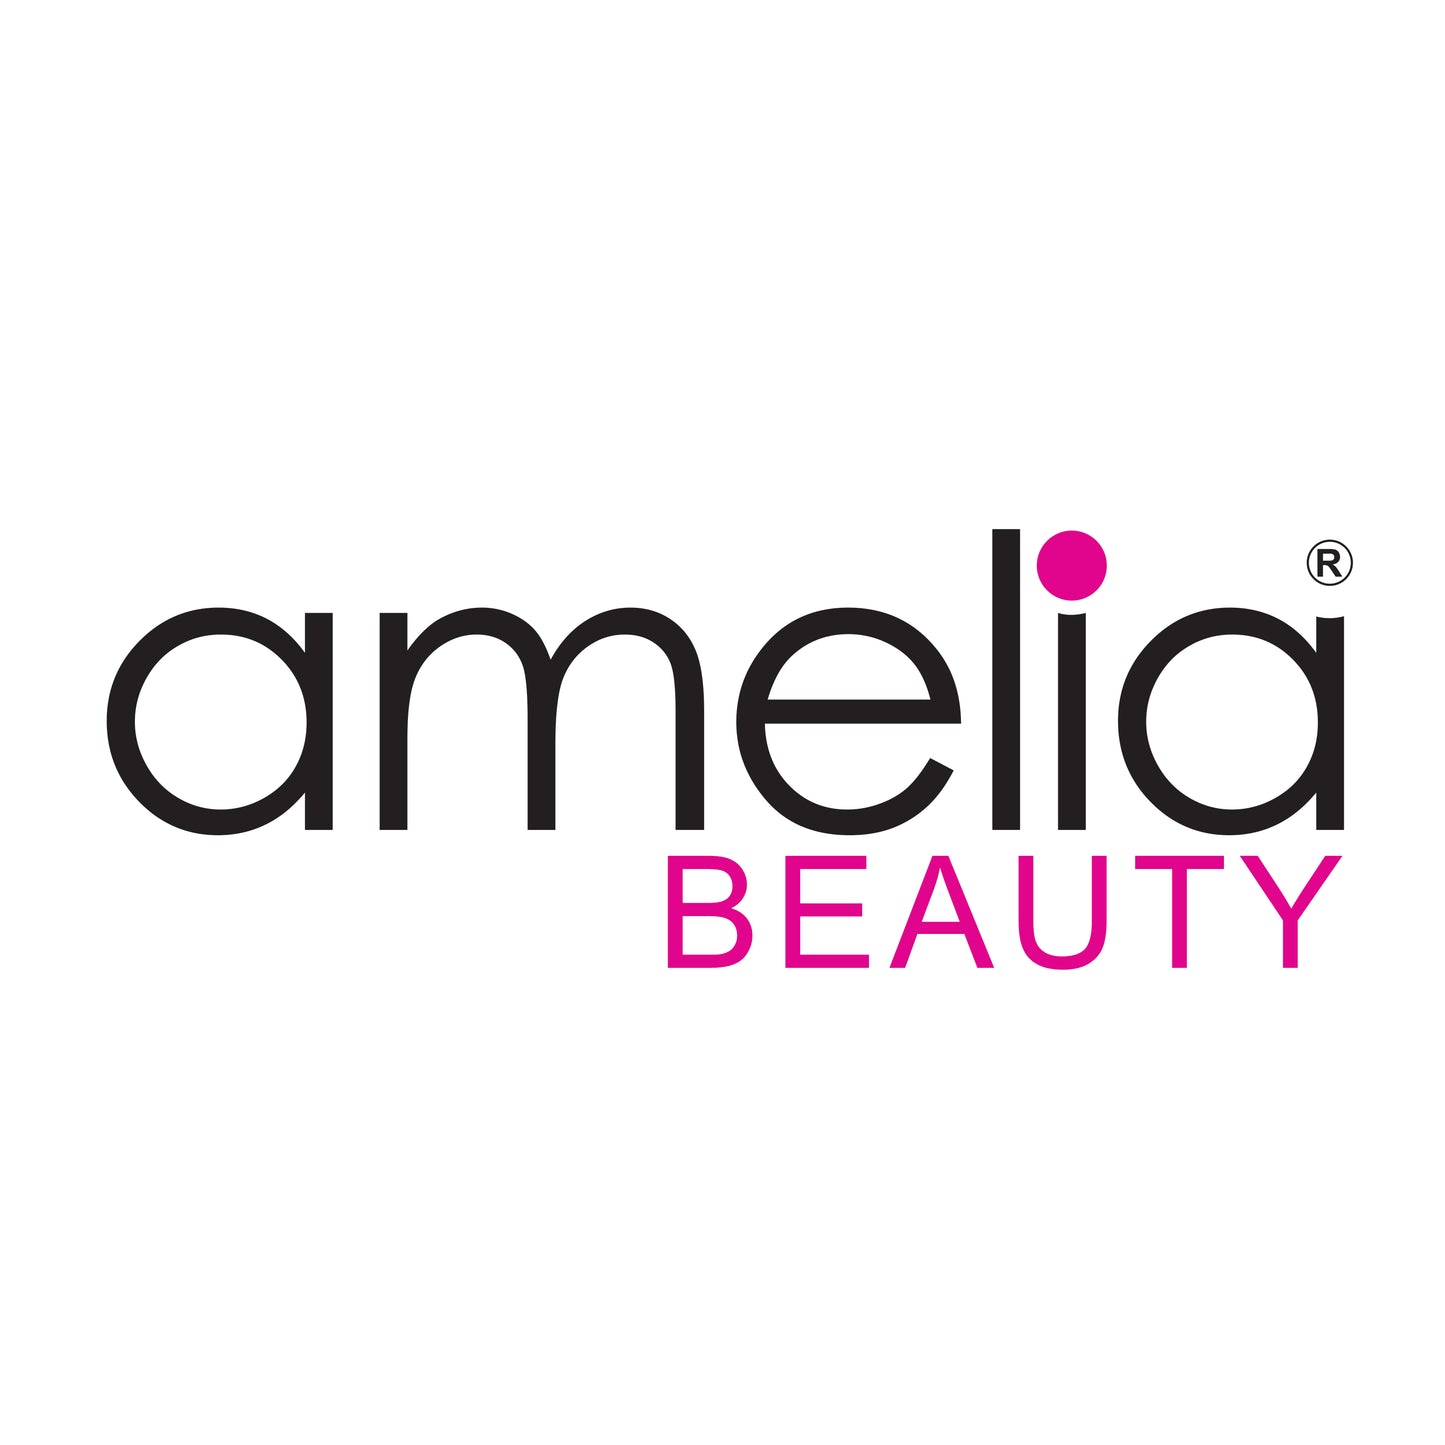 Amelia Beauty Products 8 Medium Elastic Hair Coils, 2.0in Diameter Thick Spiral Hair Ties, Gentle on Hair, Strong Hold and Minimizes Dents and Creases, Pink